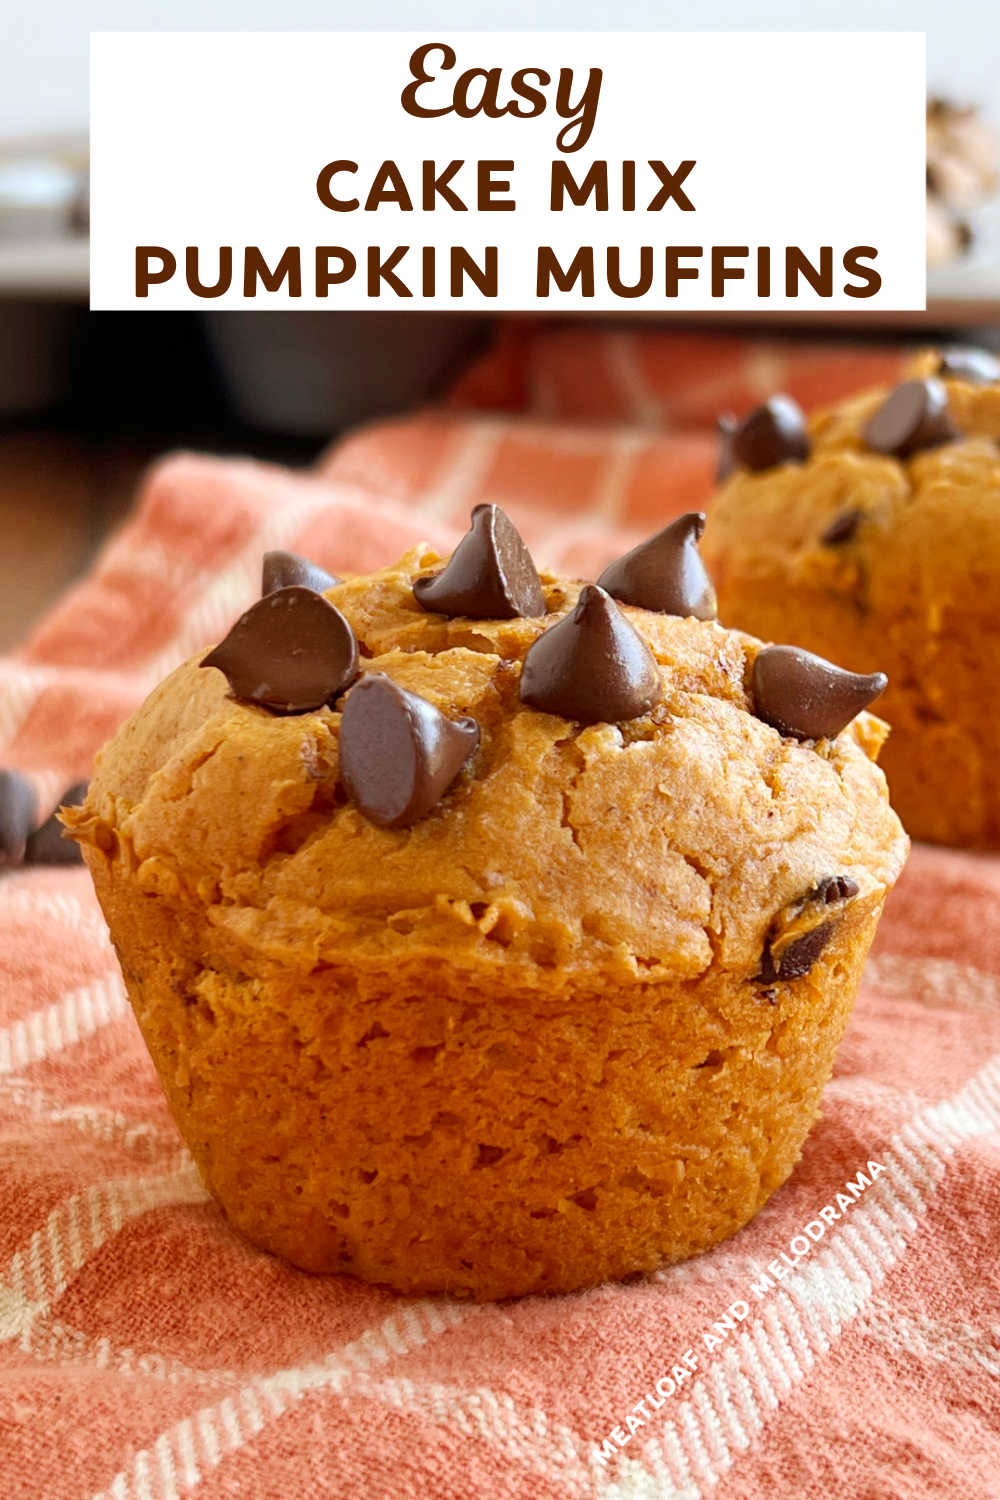 Easy Pumpkin Chocolate Chip Muffins are pumpkin muffins made with a box of cake mix and pumpkin puree. A simple pumpkin cake mix muffin recipe for a quick fall breakfast or snack! via @meamel